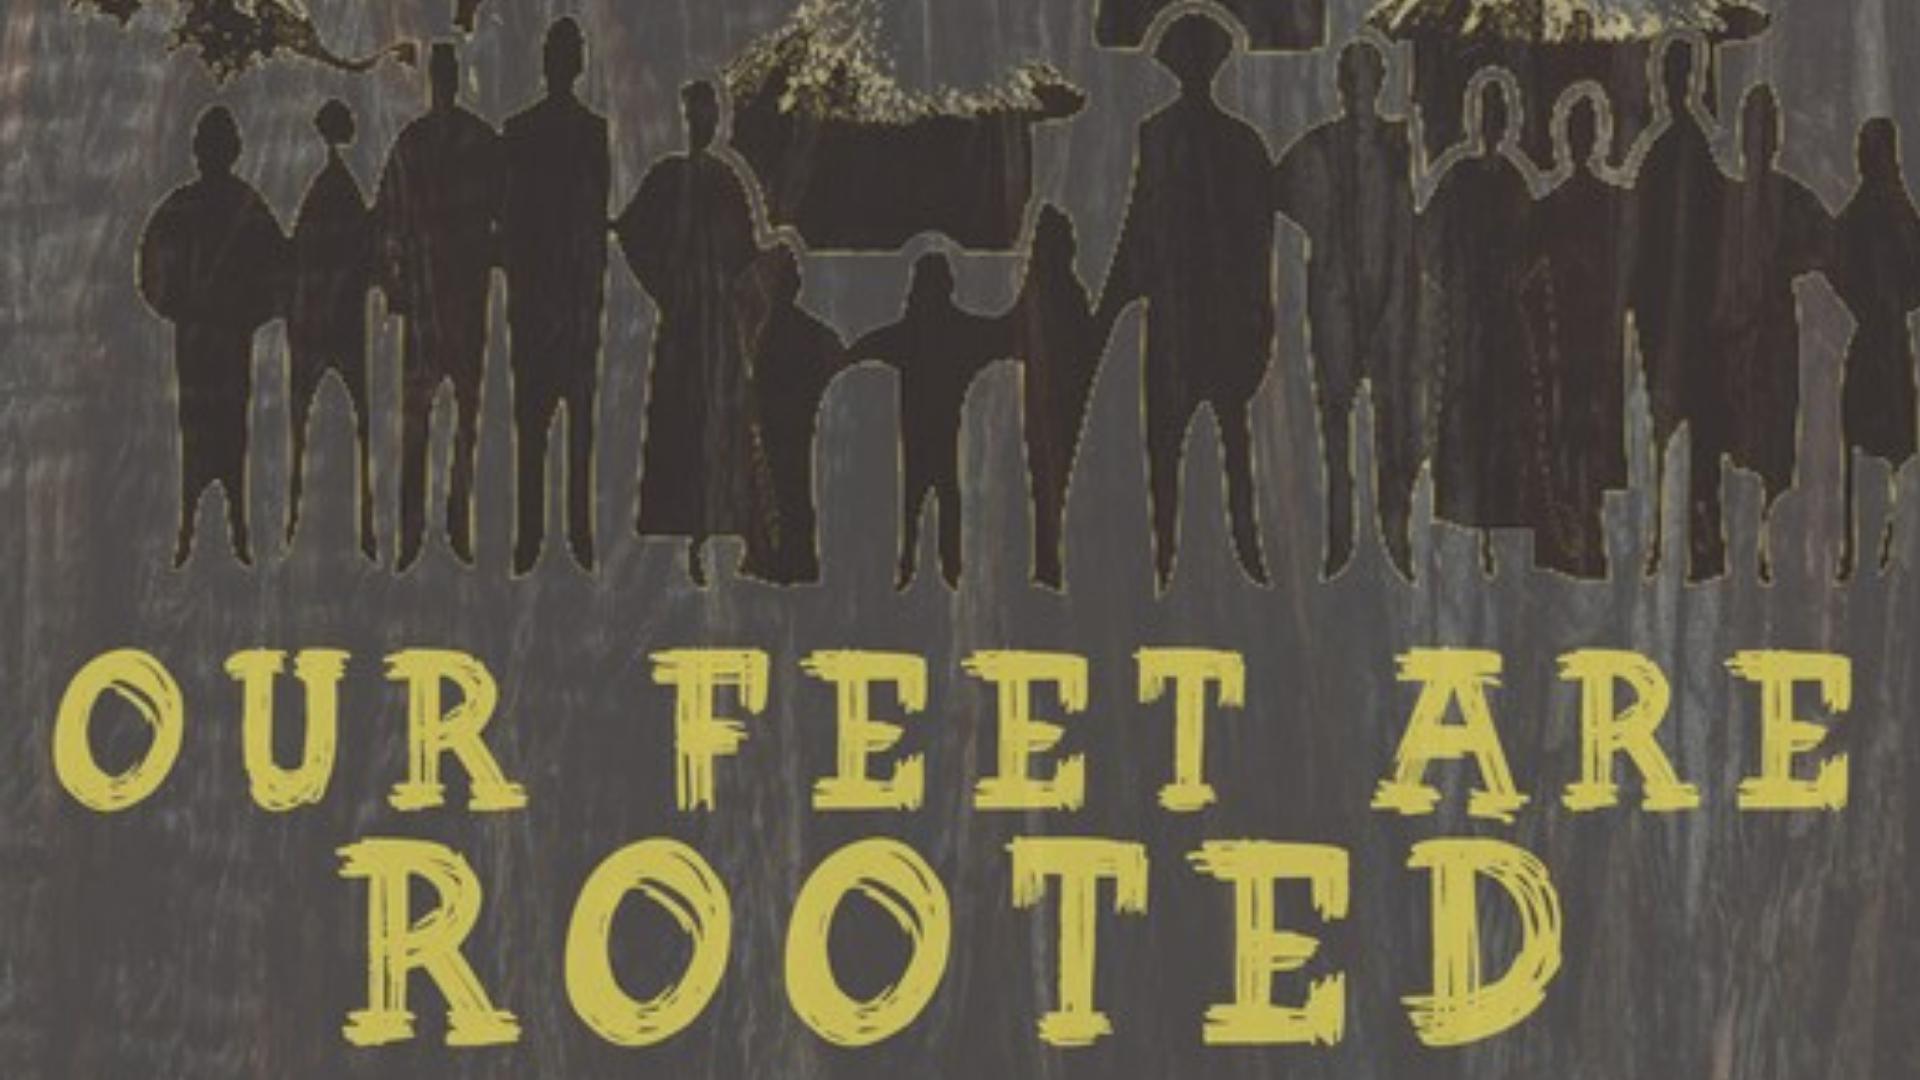 Our Feet Are Rooted